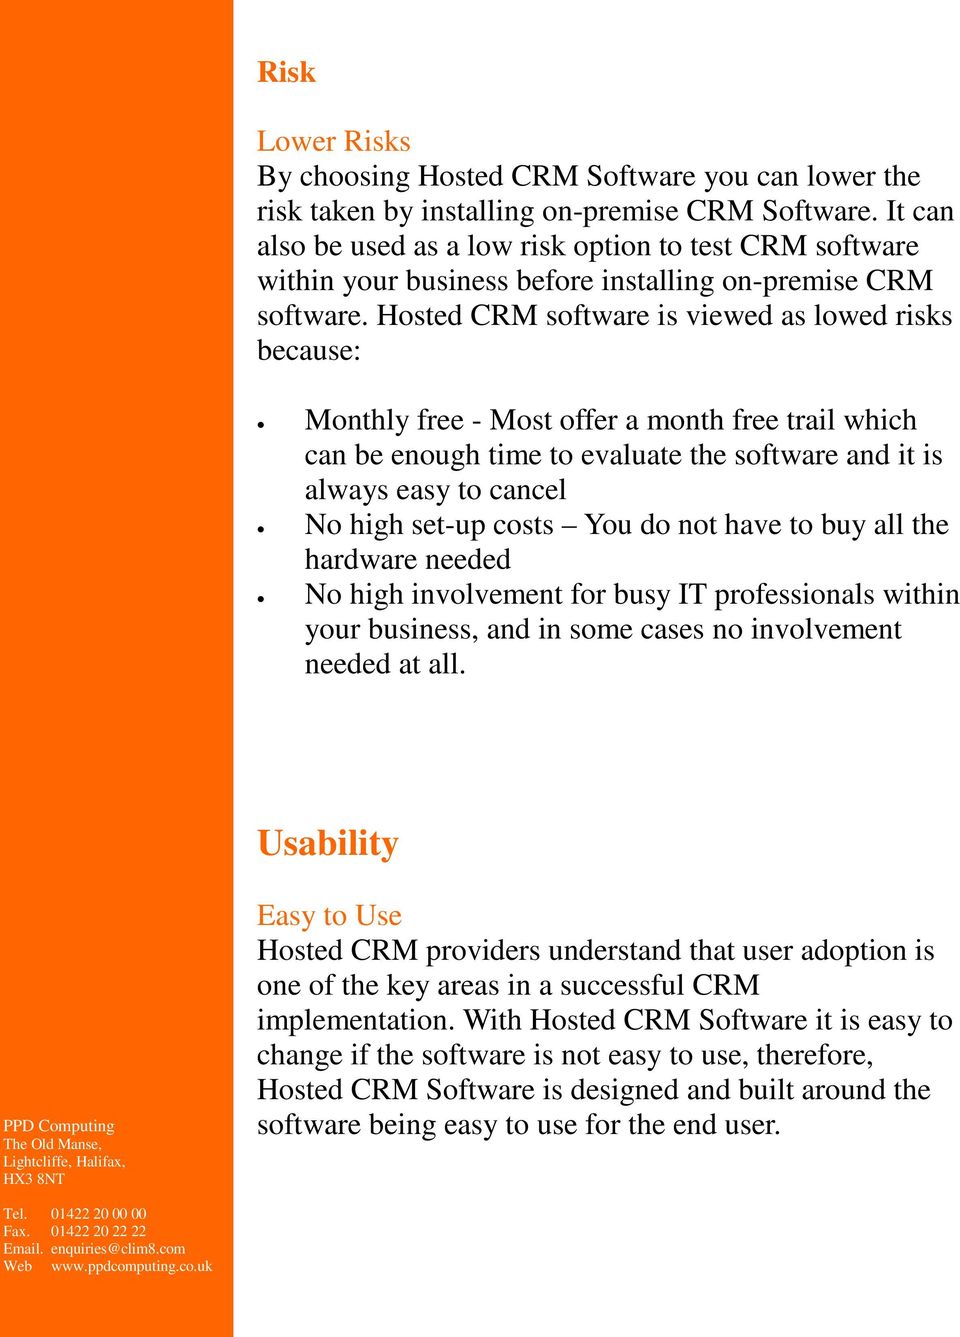 Hosted CRM software is viewed as lowed risks because: Monthly free - Most offer a month free trail which can be enough time to evaluate the software and it is always easy to cancel No high set-up